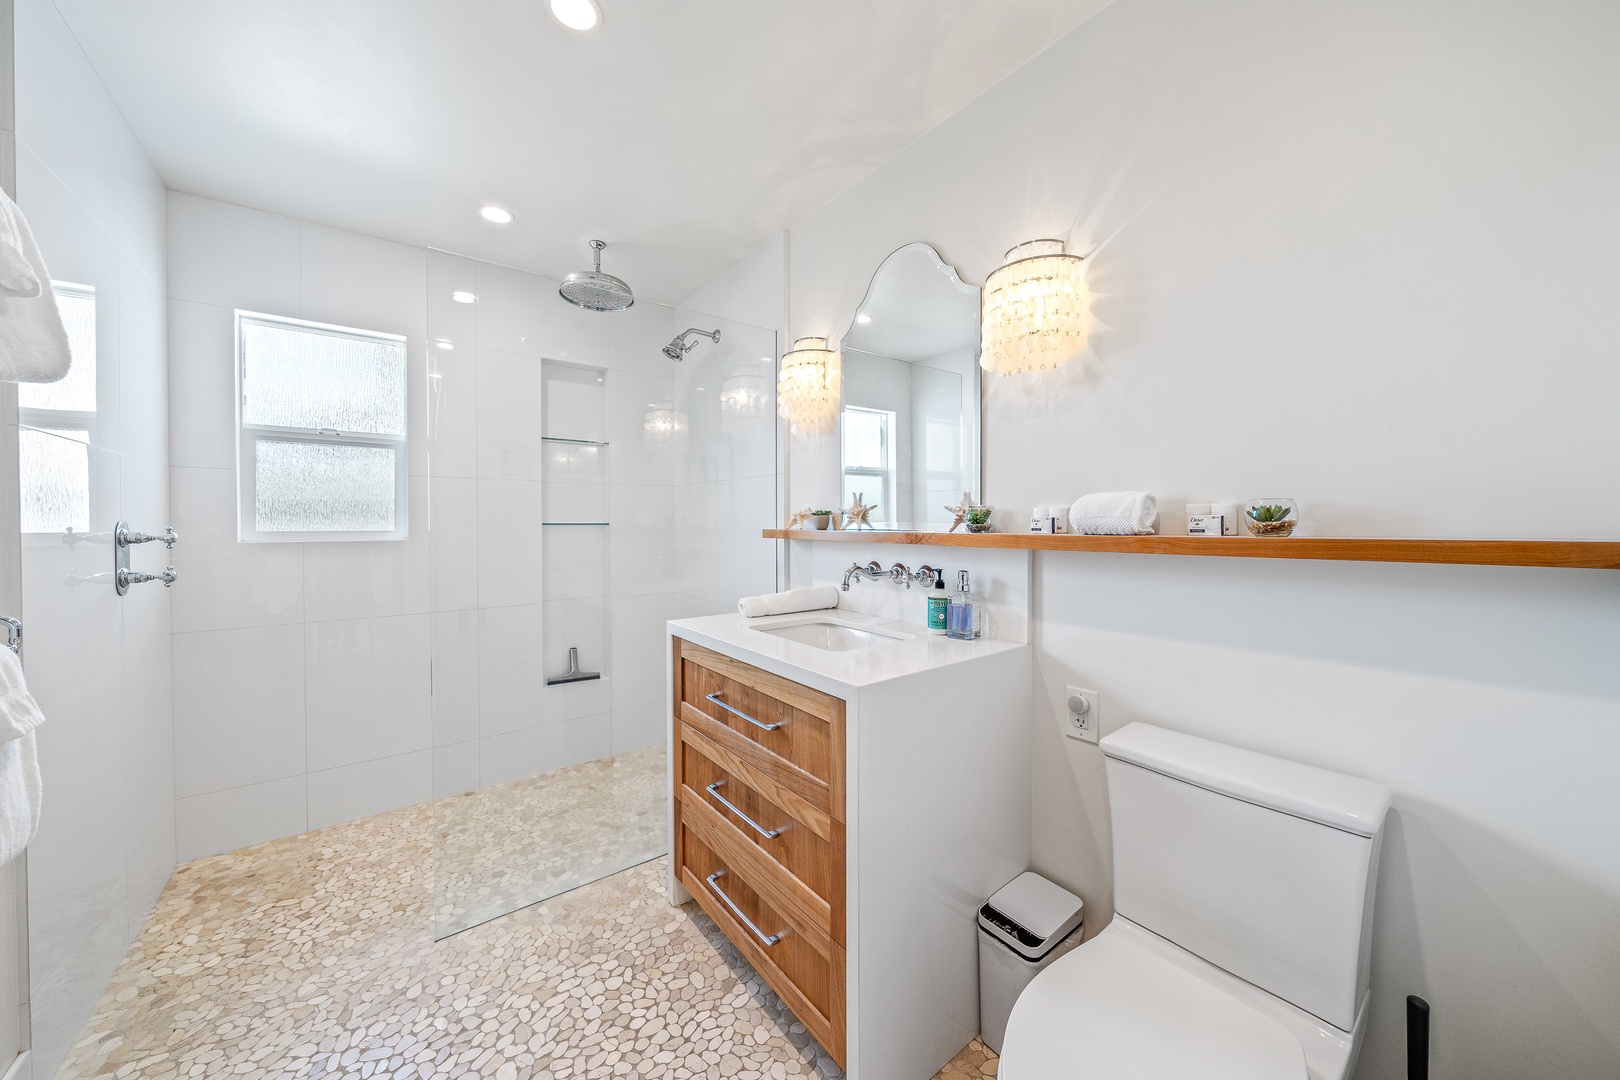 The full bathroom includes a chic single vanity & glass walk-in shower